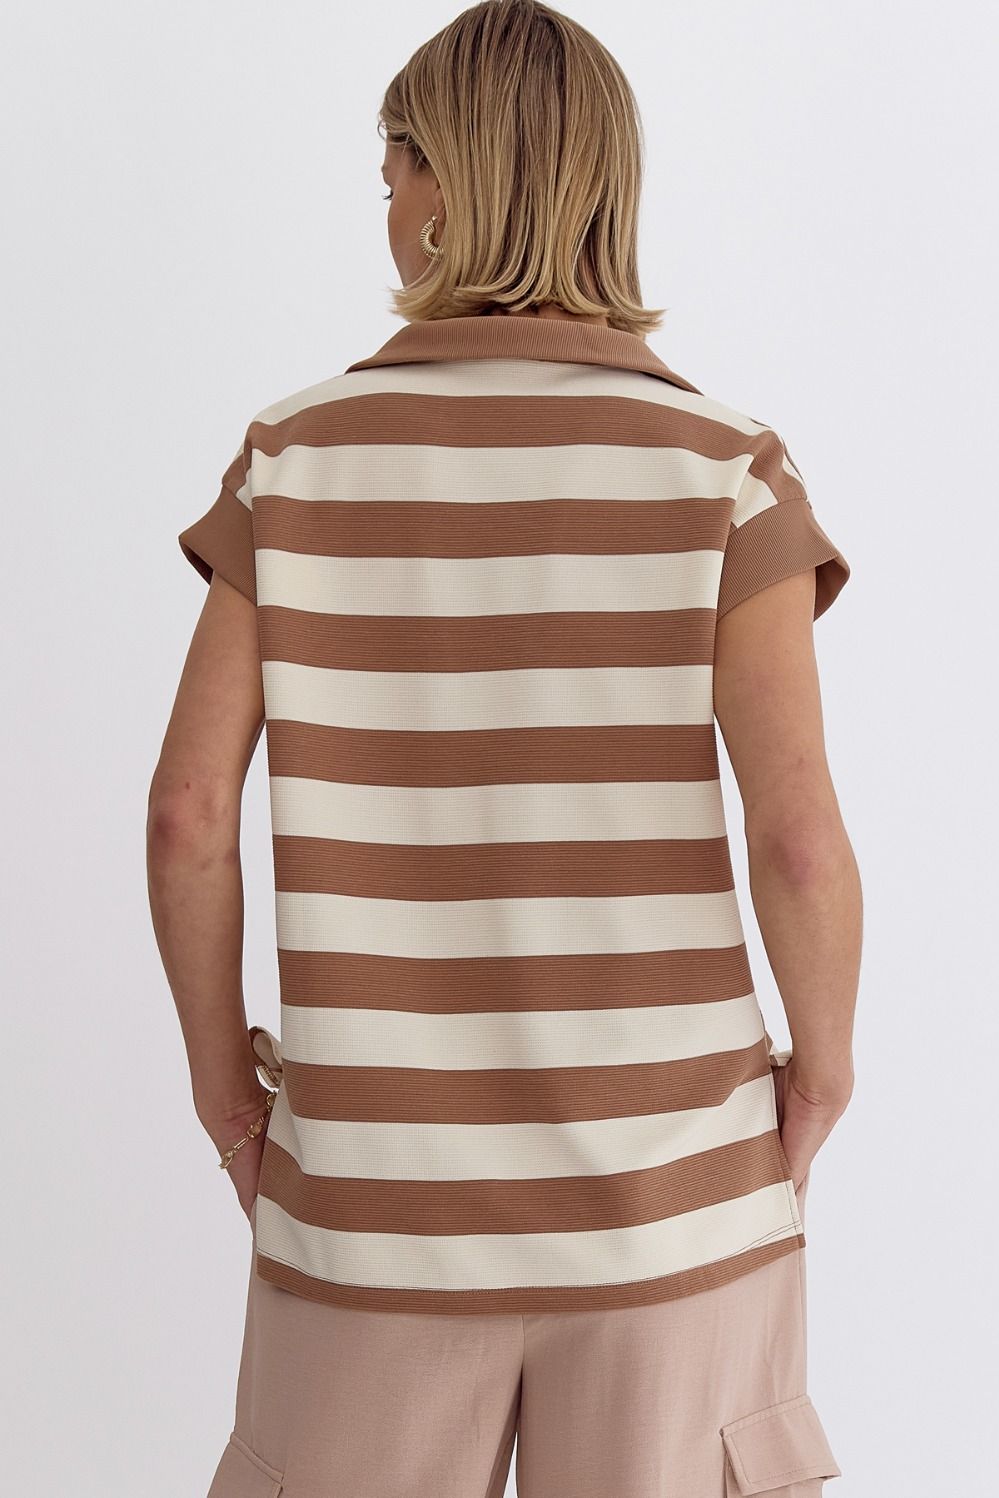 Entro | Striped Collared Top | Sweetest Stitch Shop for Cute Tops